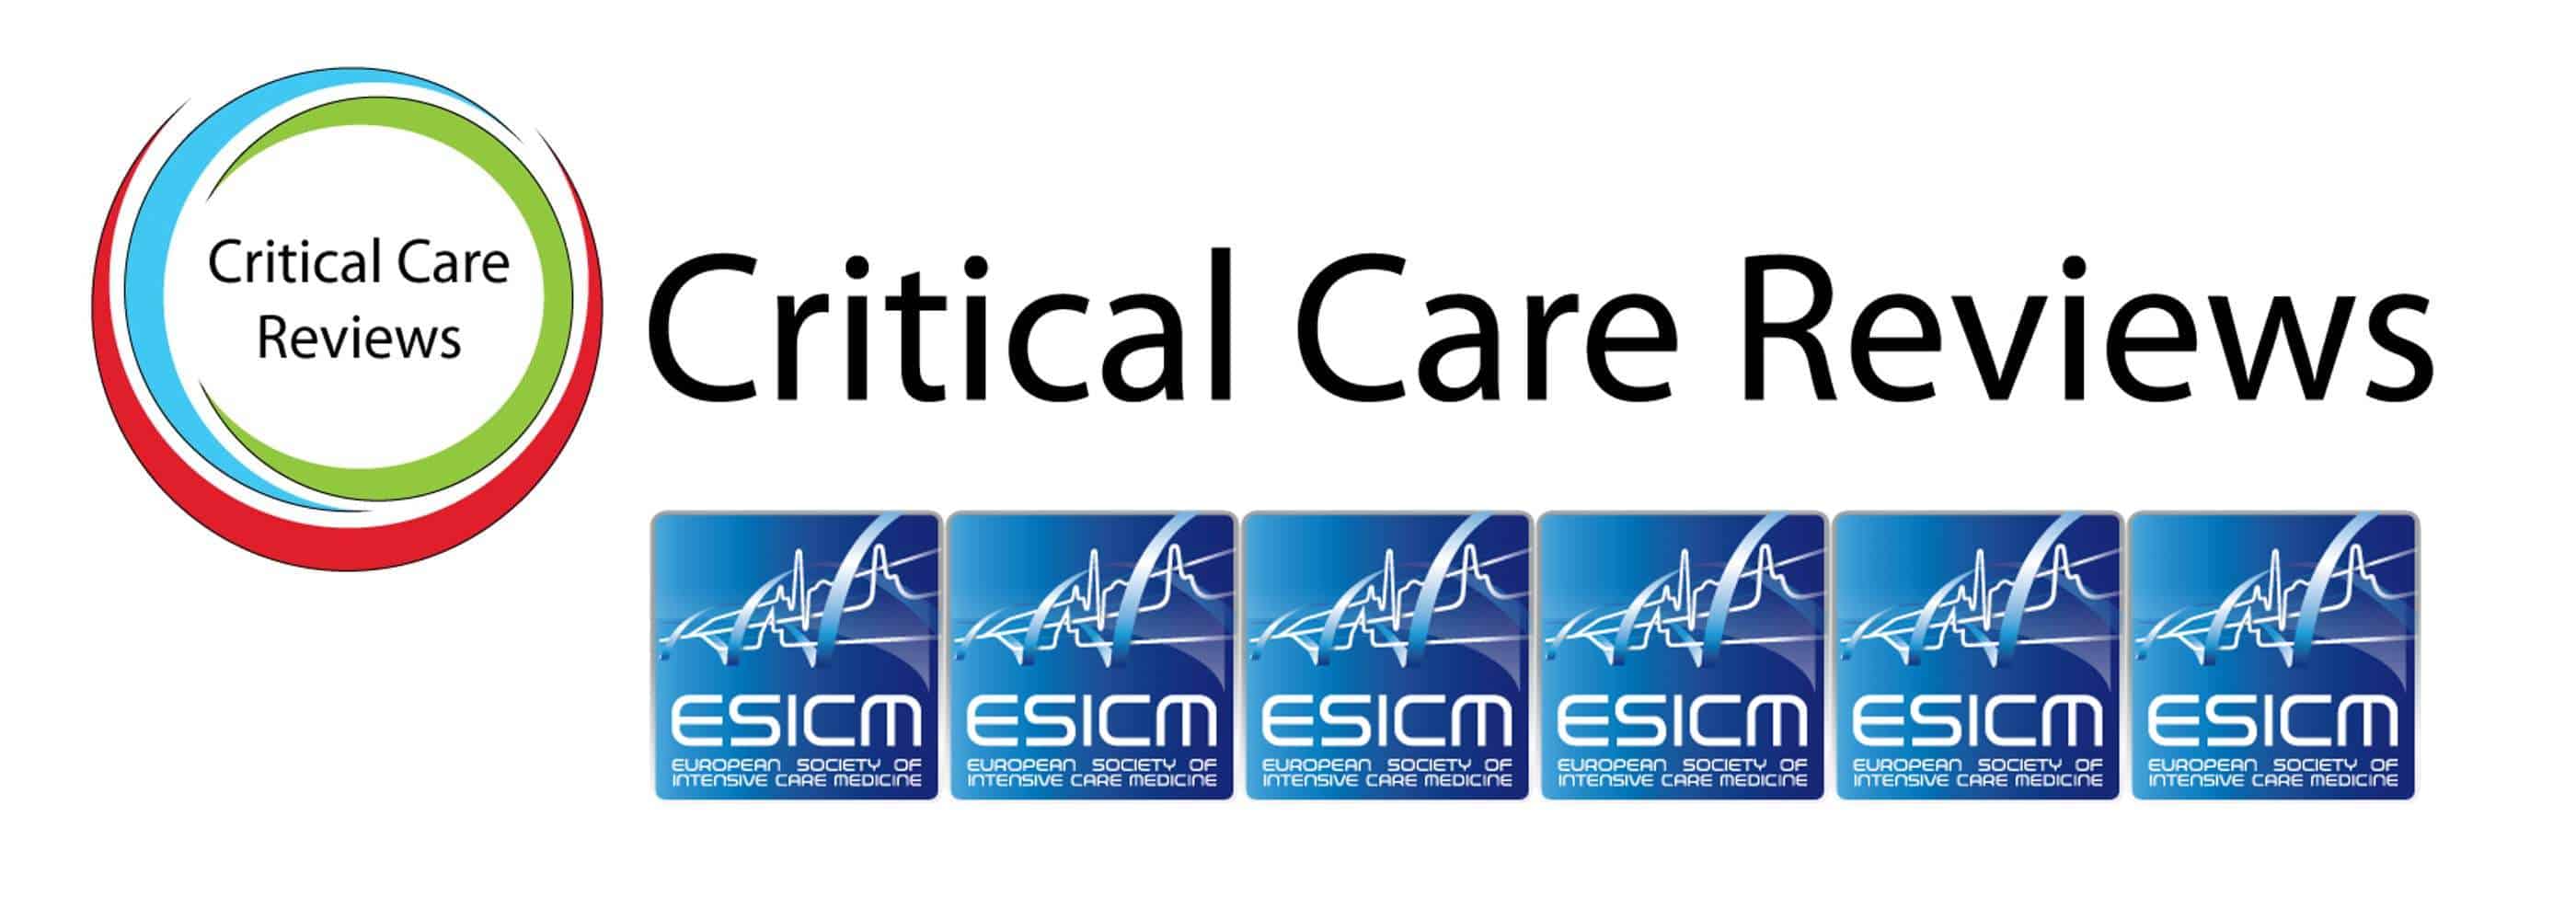 ESICM Logo - ESICM Update on Crit Care Reviews - Intensive Care Network